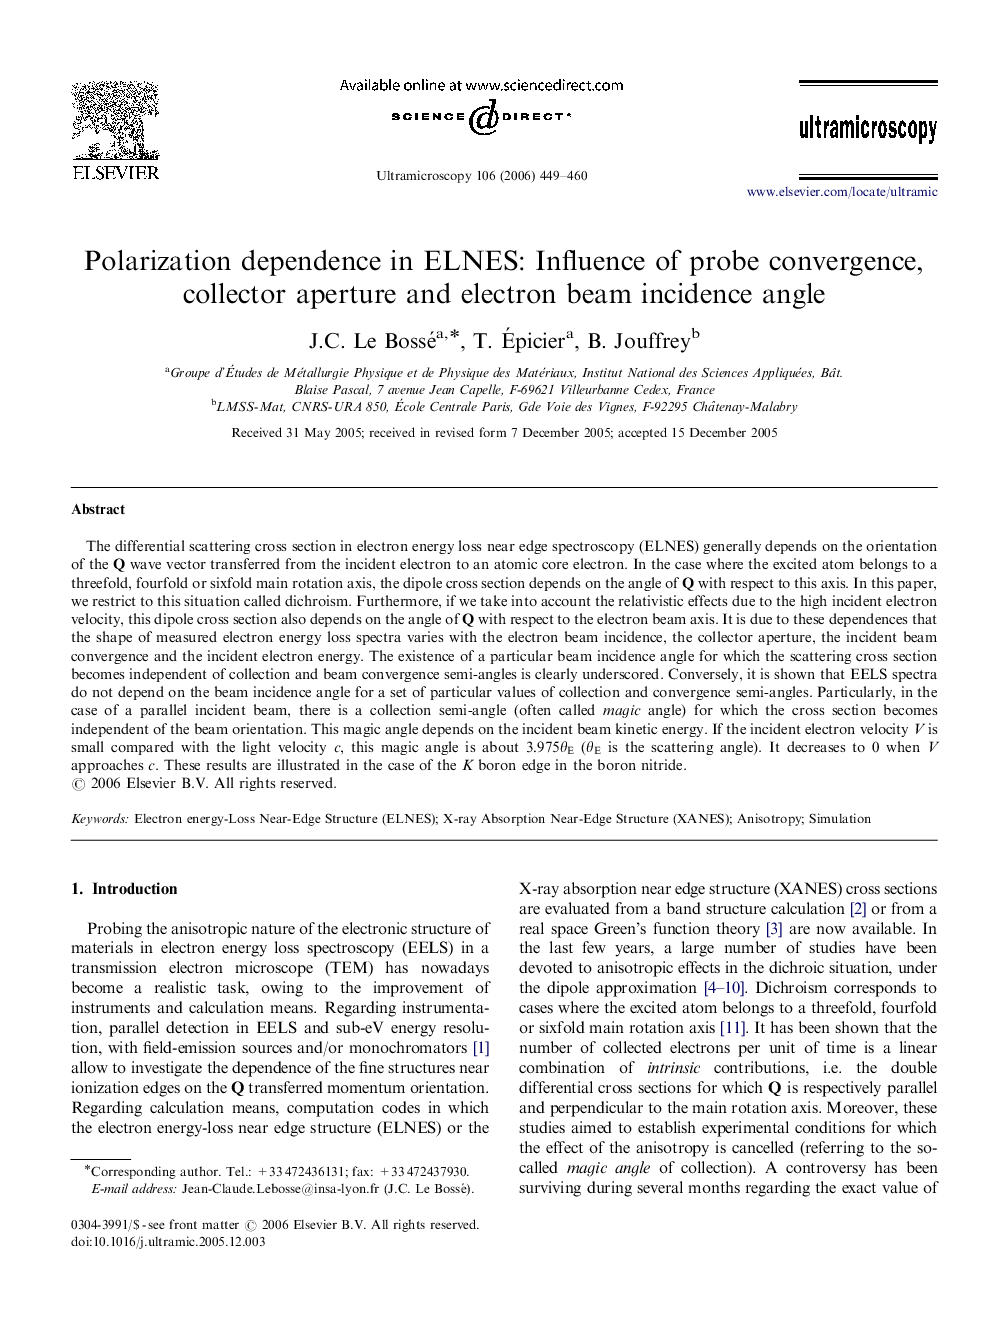 Polarization dependence in ELNES: Influence of probe convergence, collector aperture and electron beam incidence angle